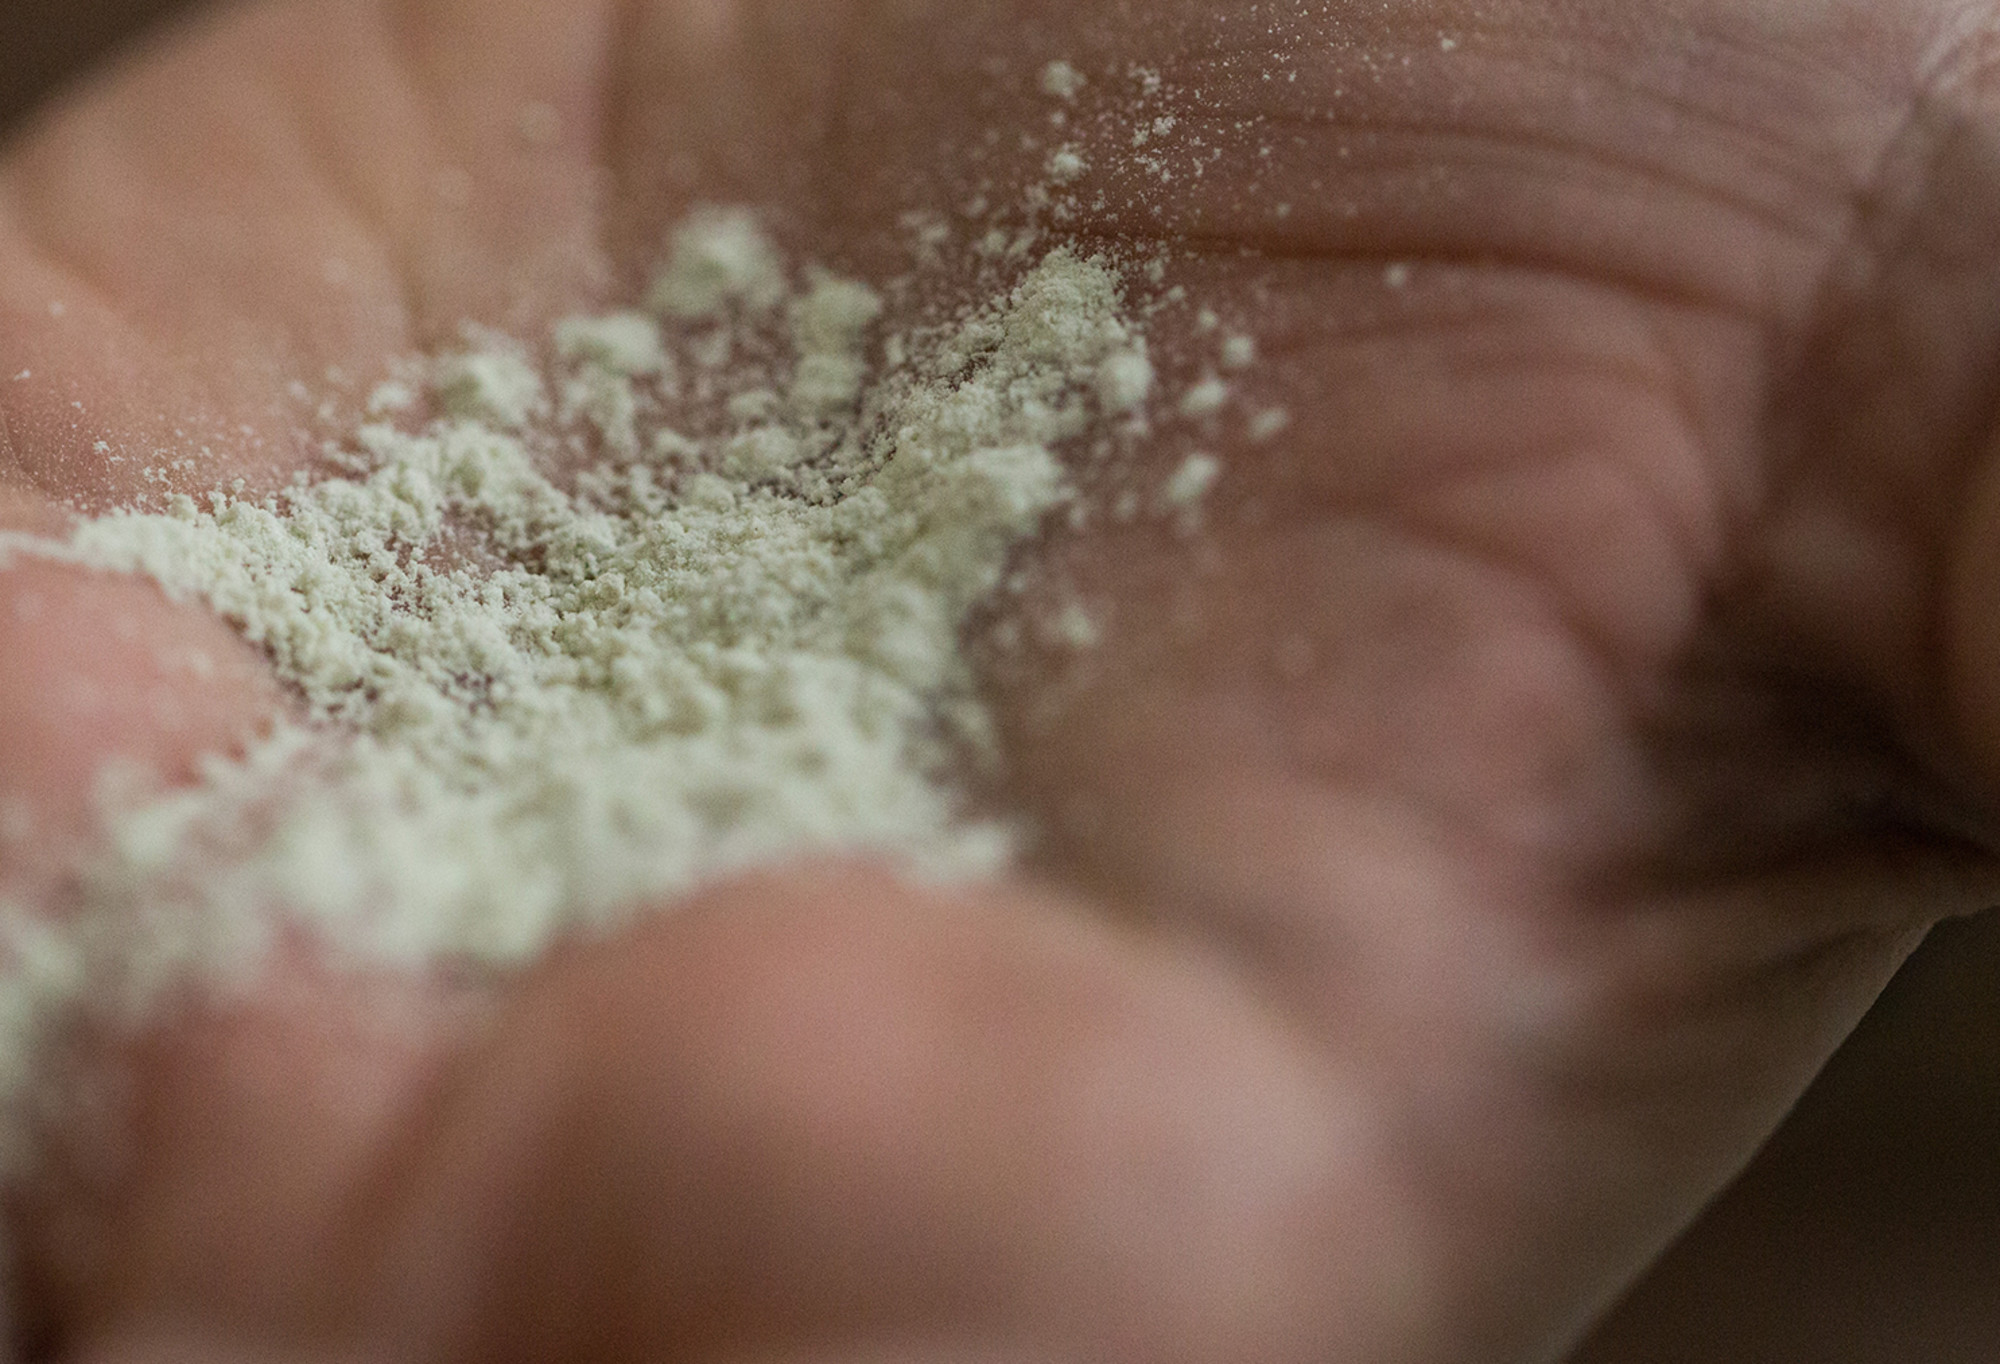 A sprinkling of The Greeench - a creamy, pale green coloured, fine deodorant powder - is held in the palm of a hand.